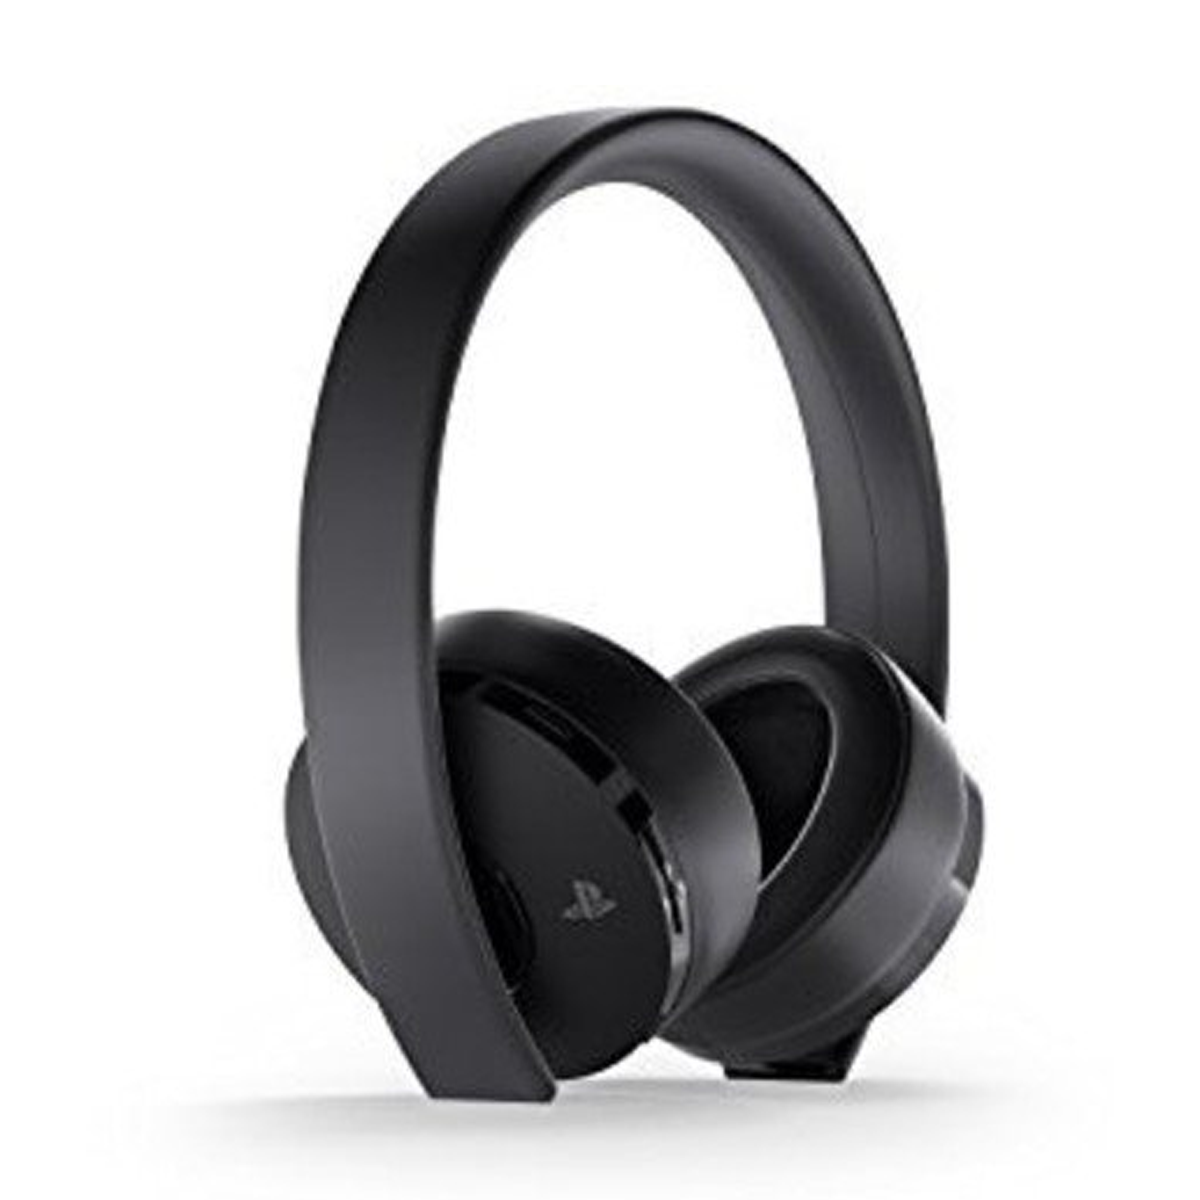 Sony PlayStation Gold Wireless Headset 7.1 Surround Sound PS4 New Version 2018